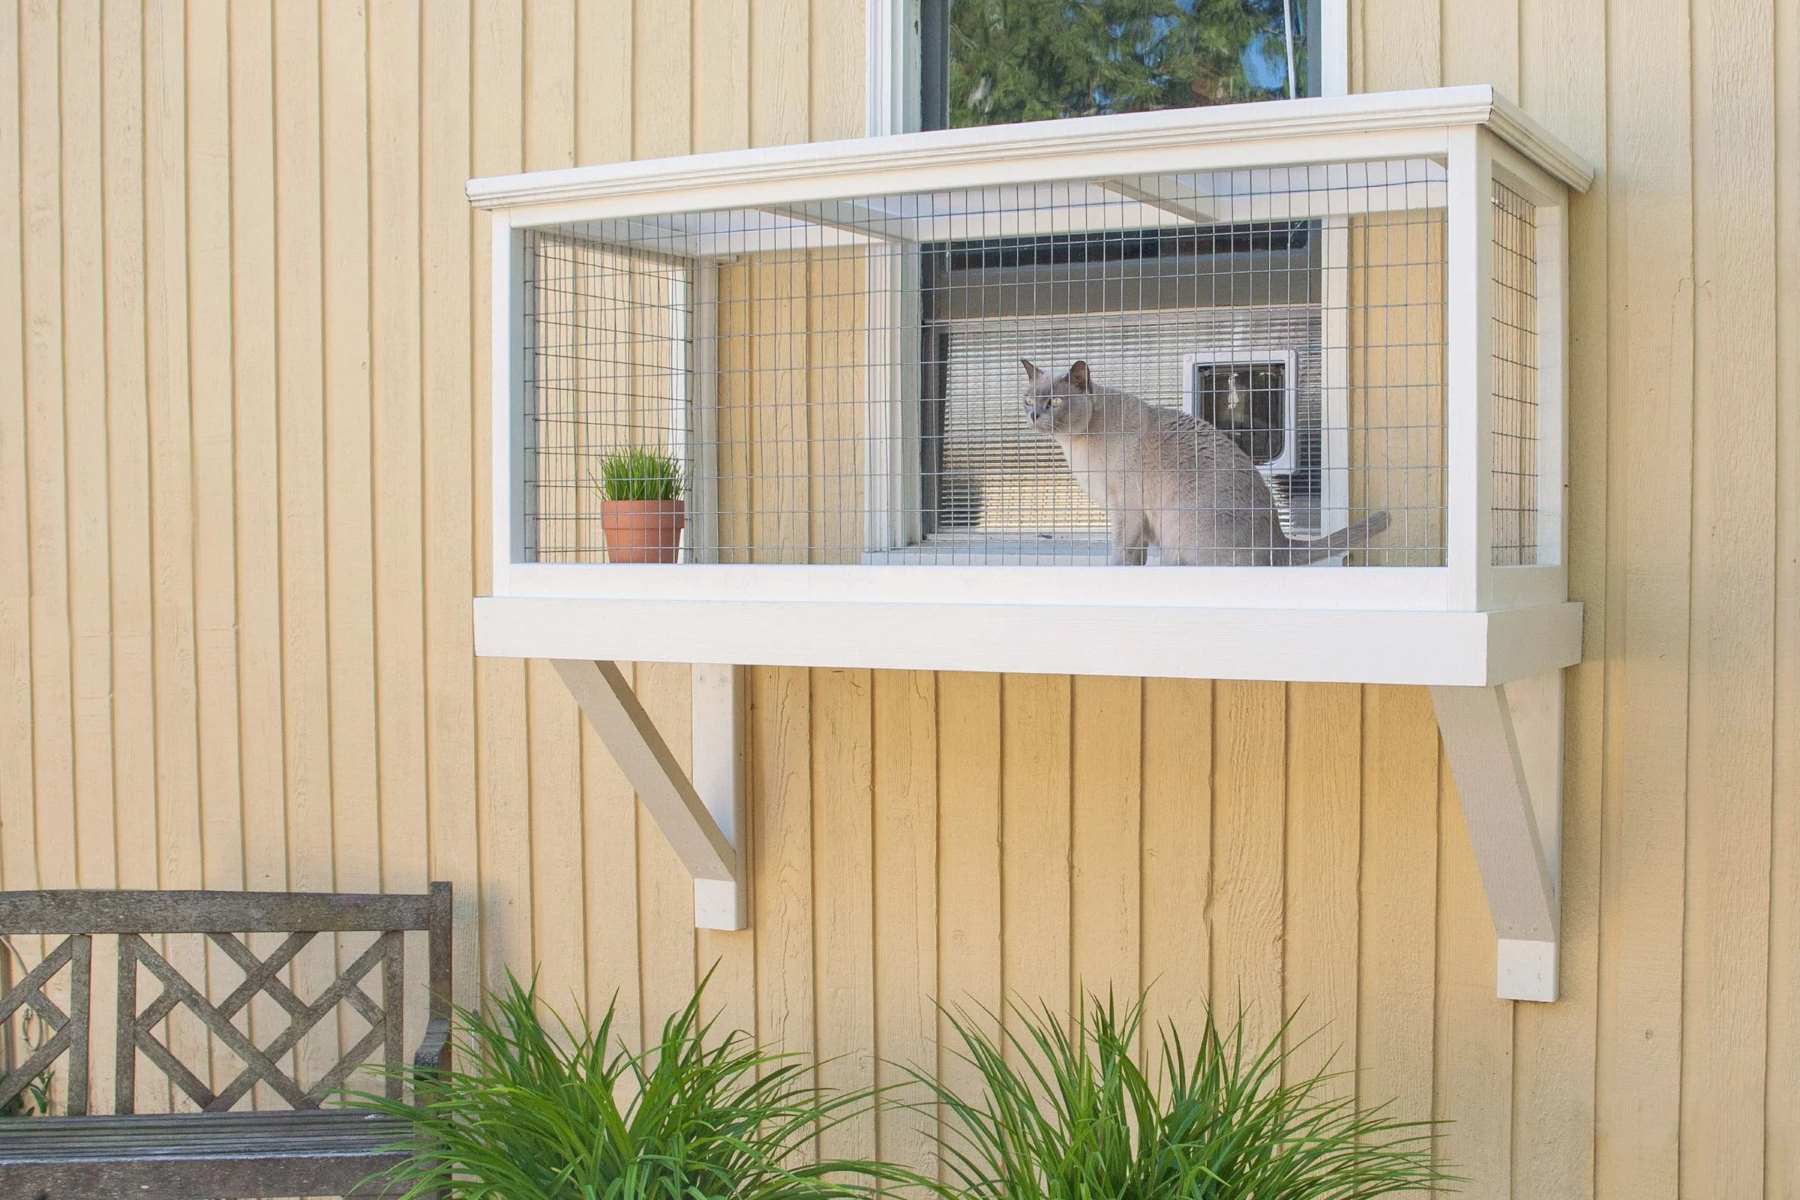 The Ultimate Guide To Choosing Between A Catio And A Cat Cage For Your Balcony